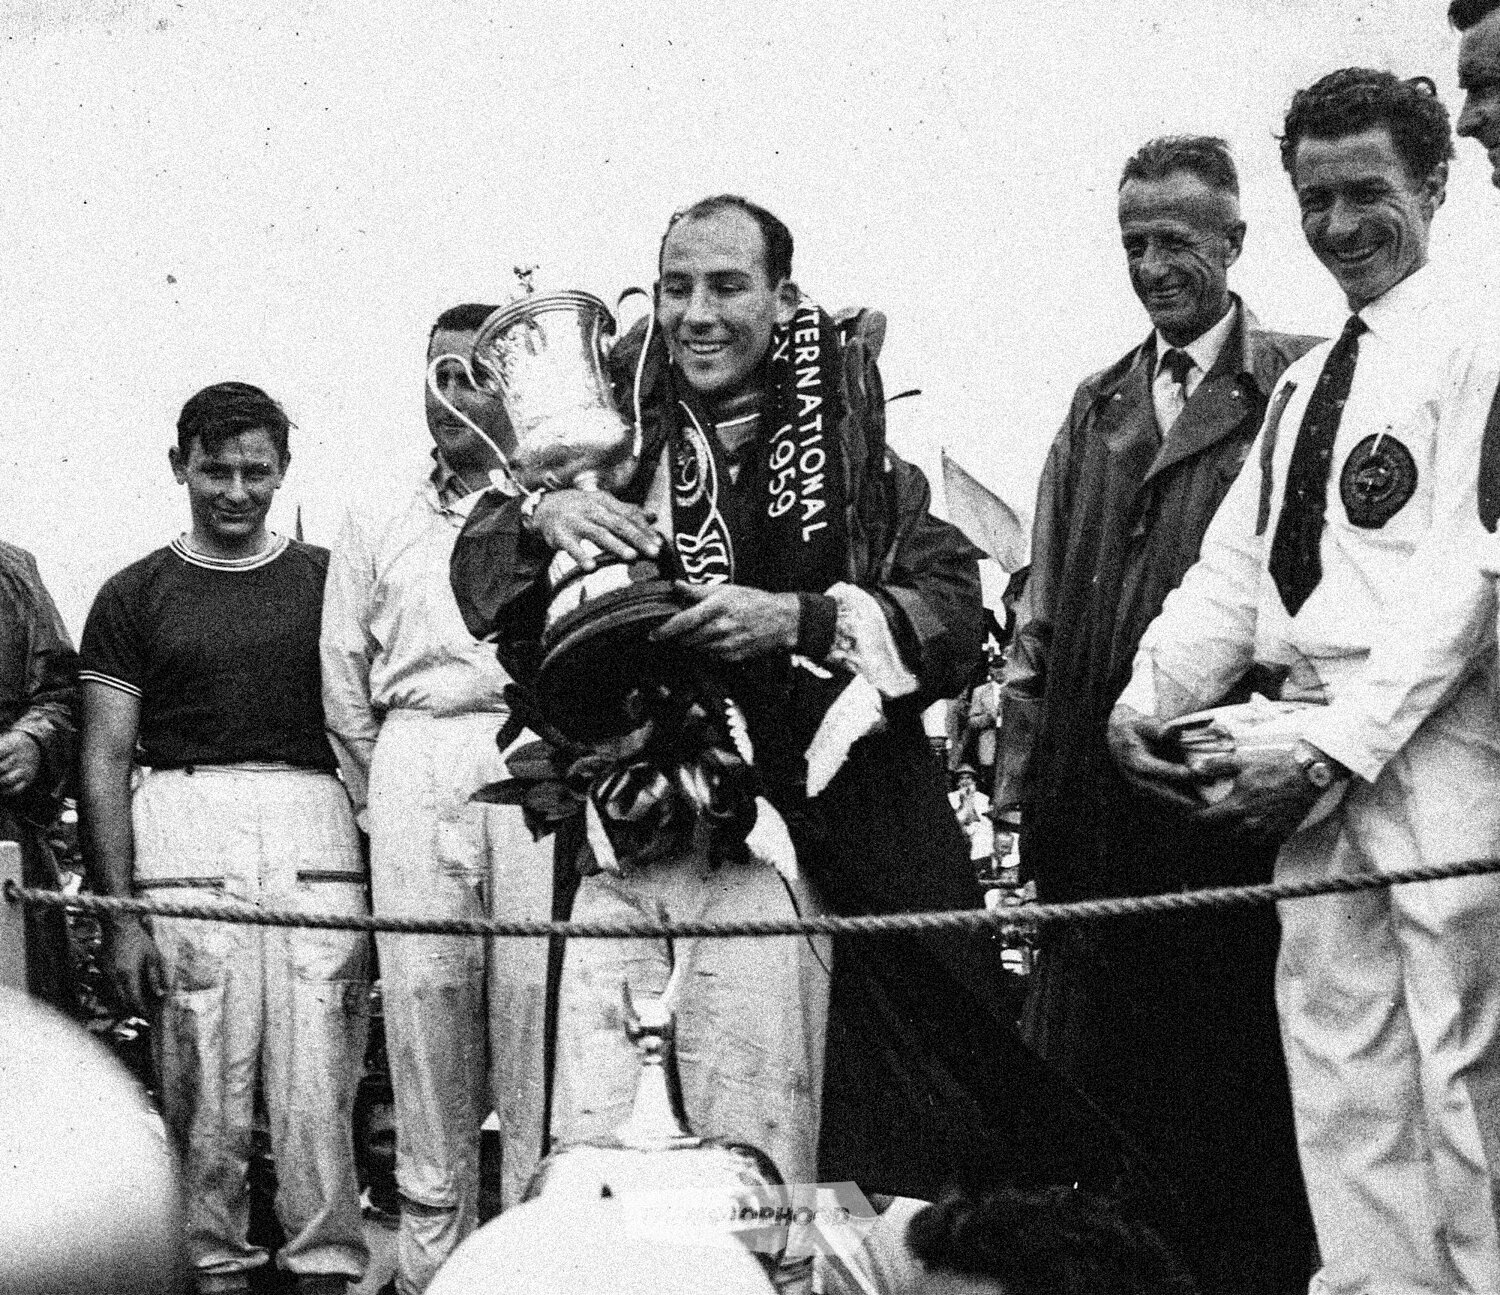 Stirling Moss after winning the 1959 GP at Ardmore in a Cooper Climax, with a young Bruce McLaren and Jack Brabham on his right and a jovial Frank ‘Buzz’ Perkins in white shirt and tie to his left. Perkins was secretary of the New Zealand Grand Prix…